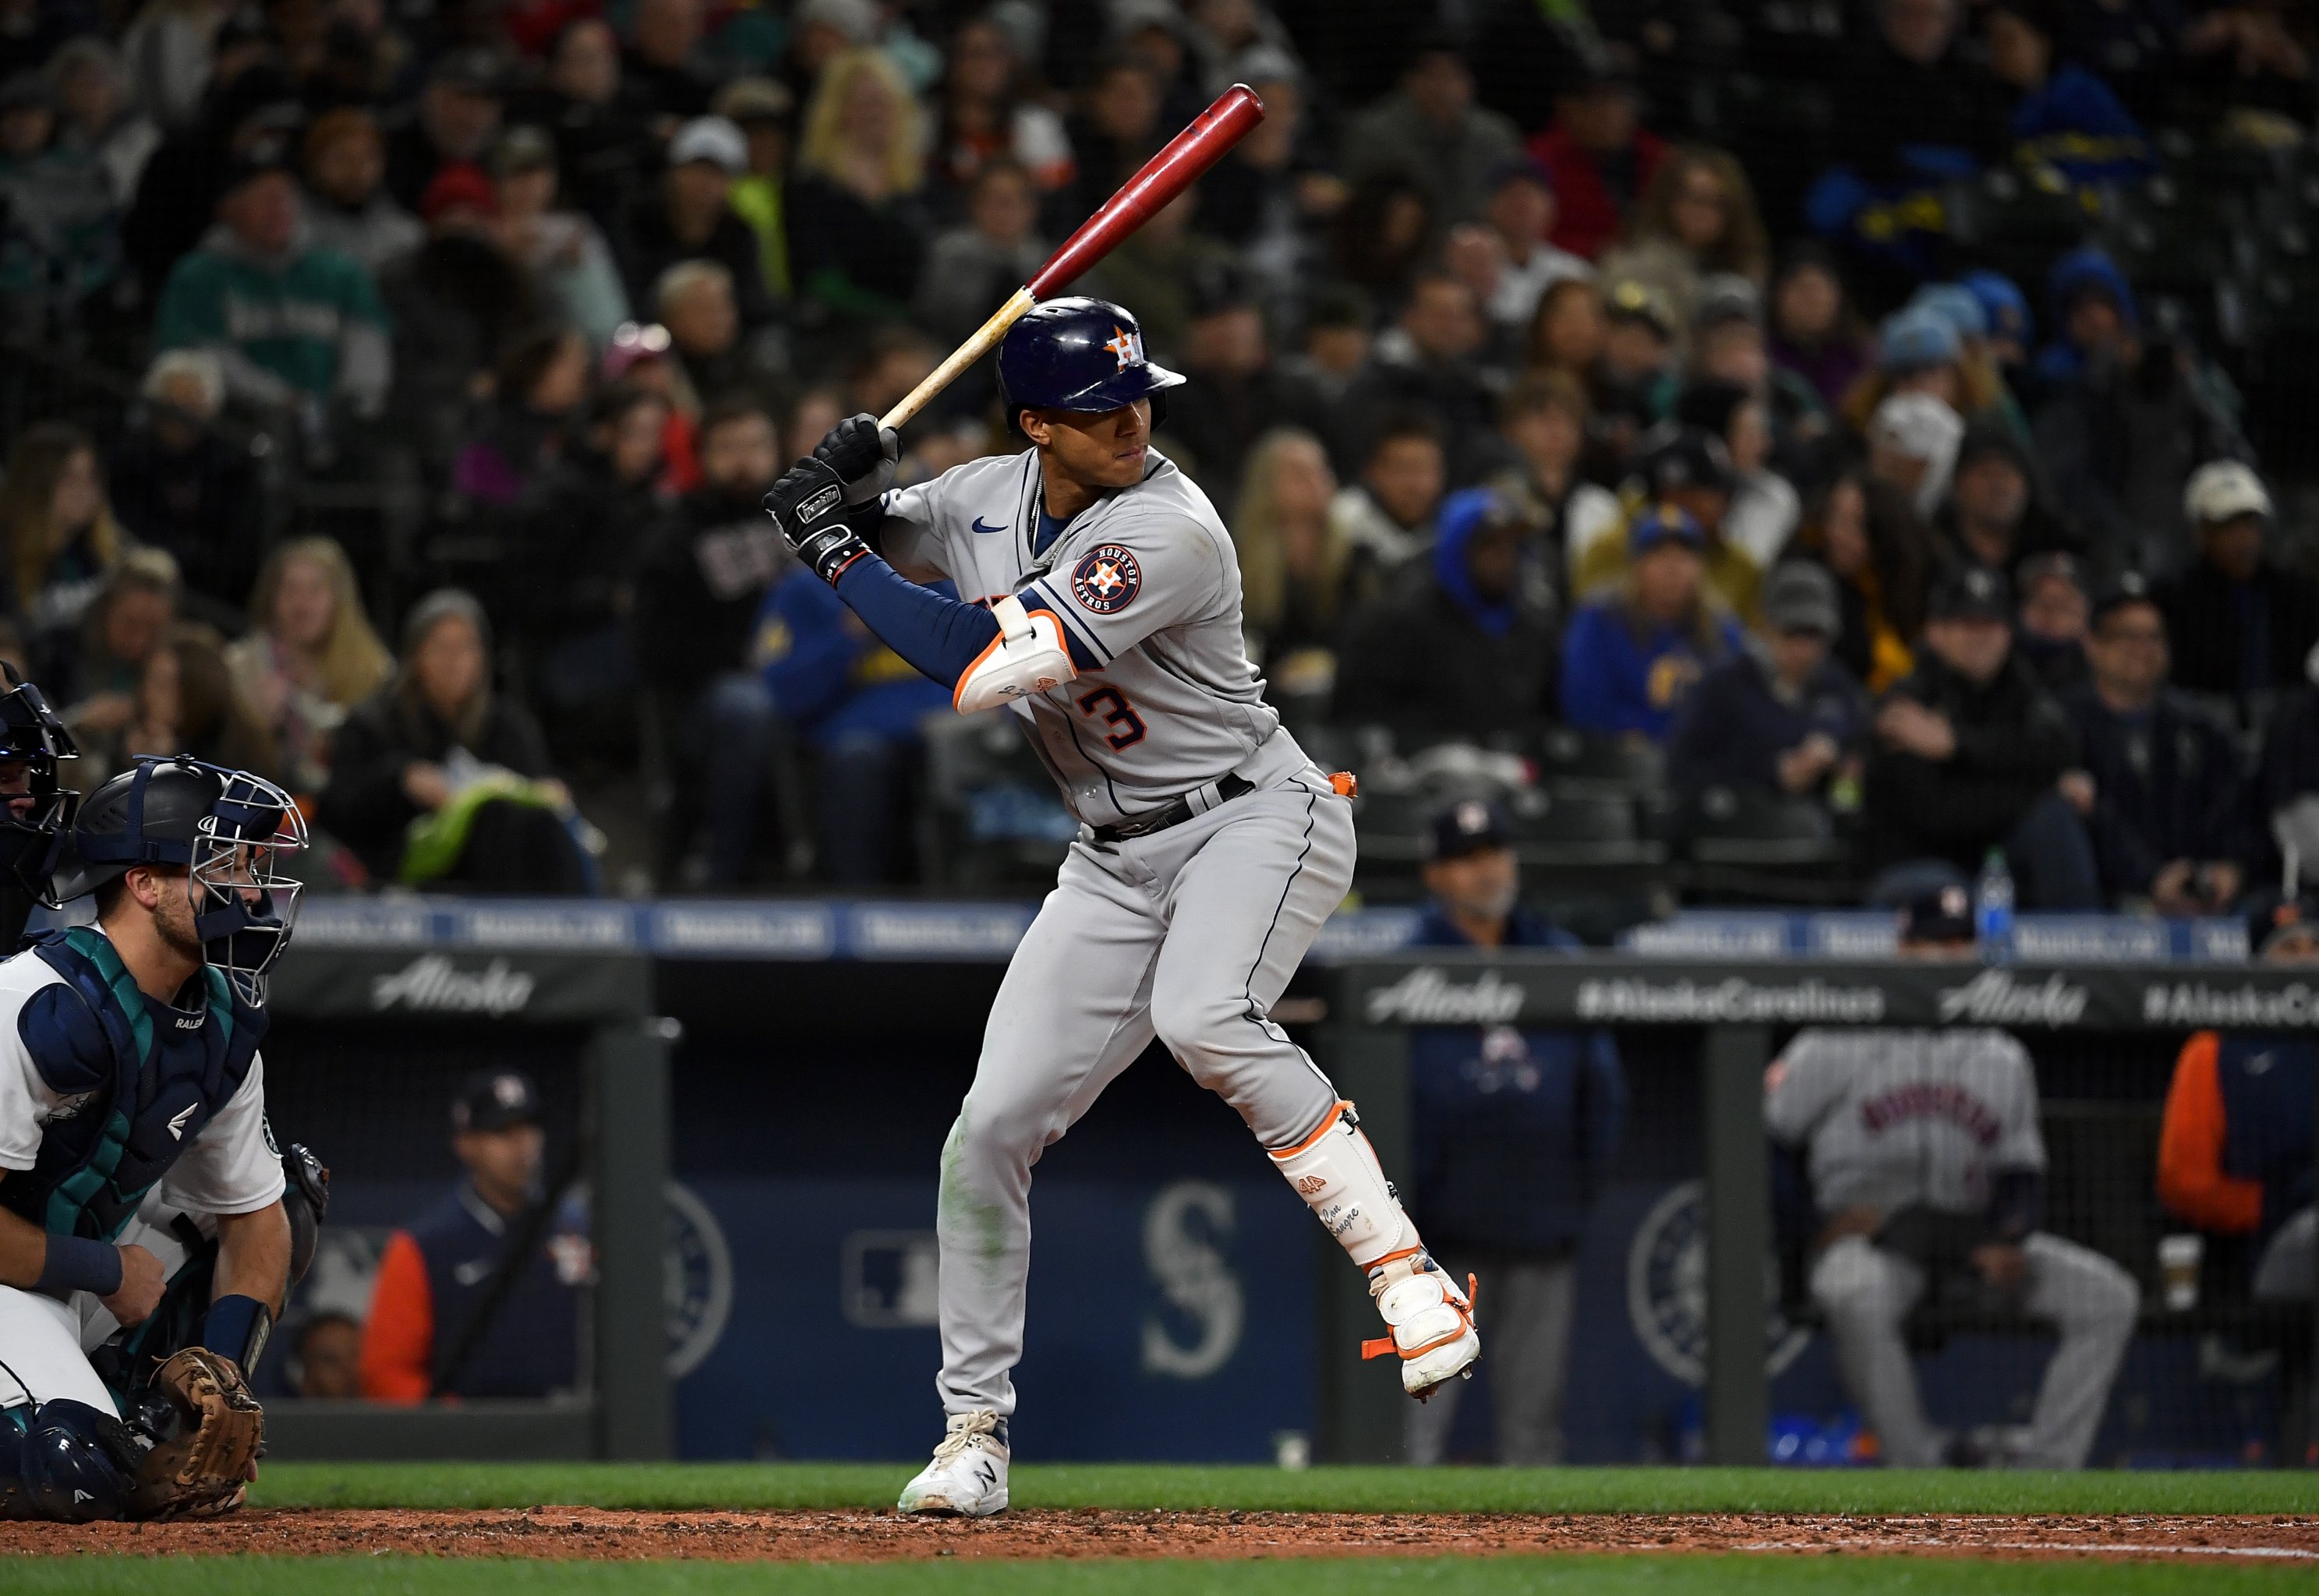 Houston Astros roster: Time for a shakeup, promote this outfielder